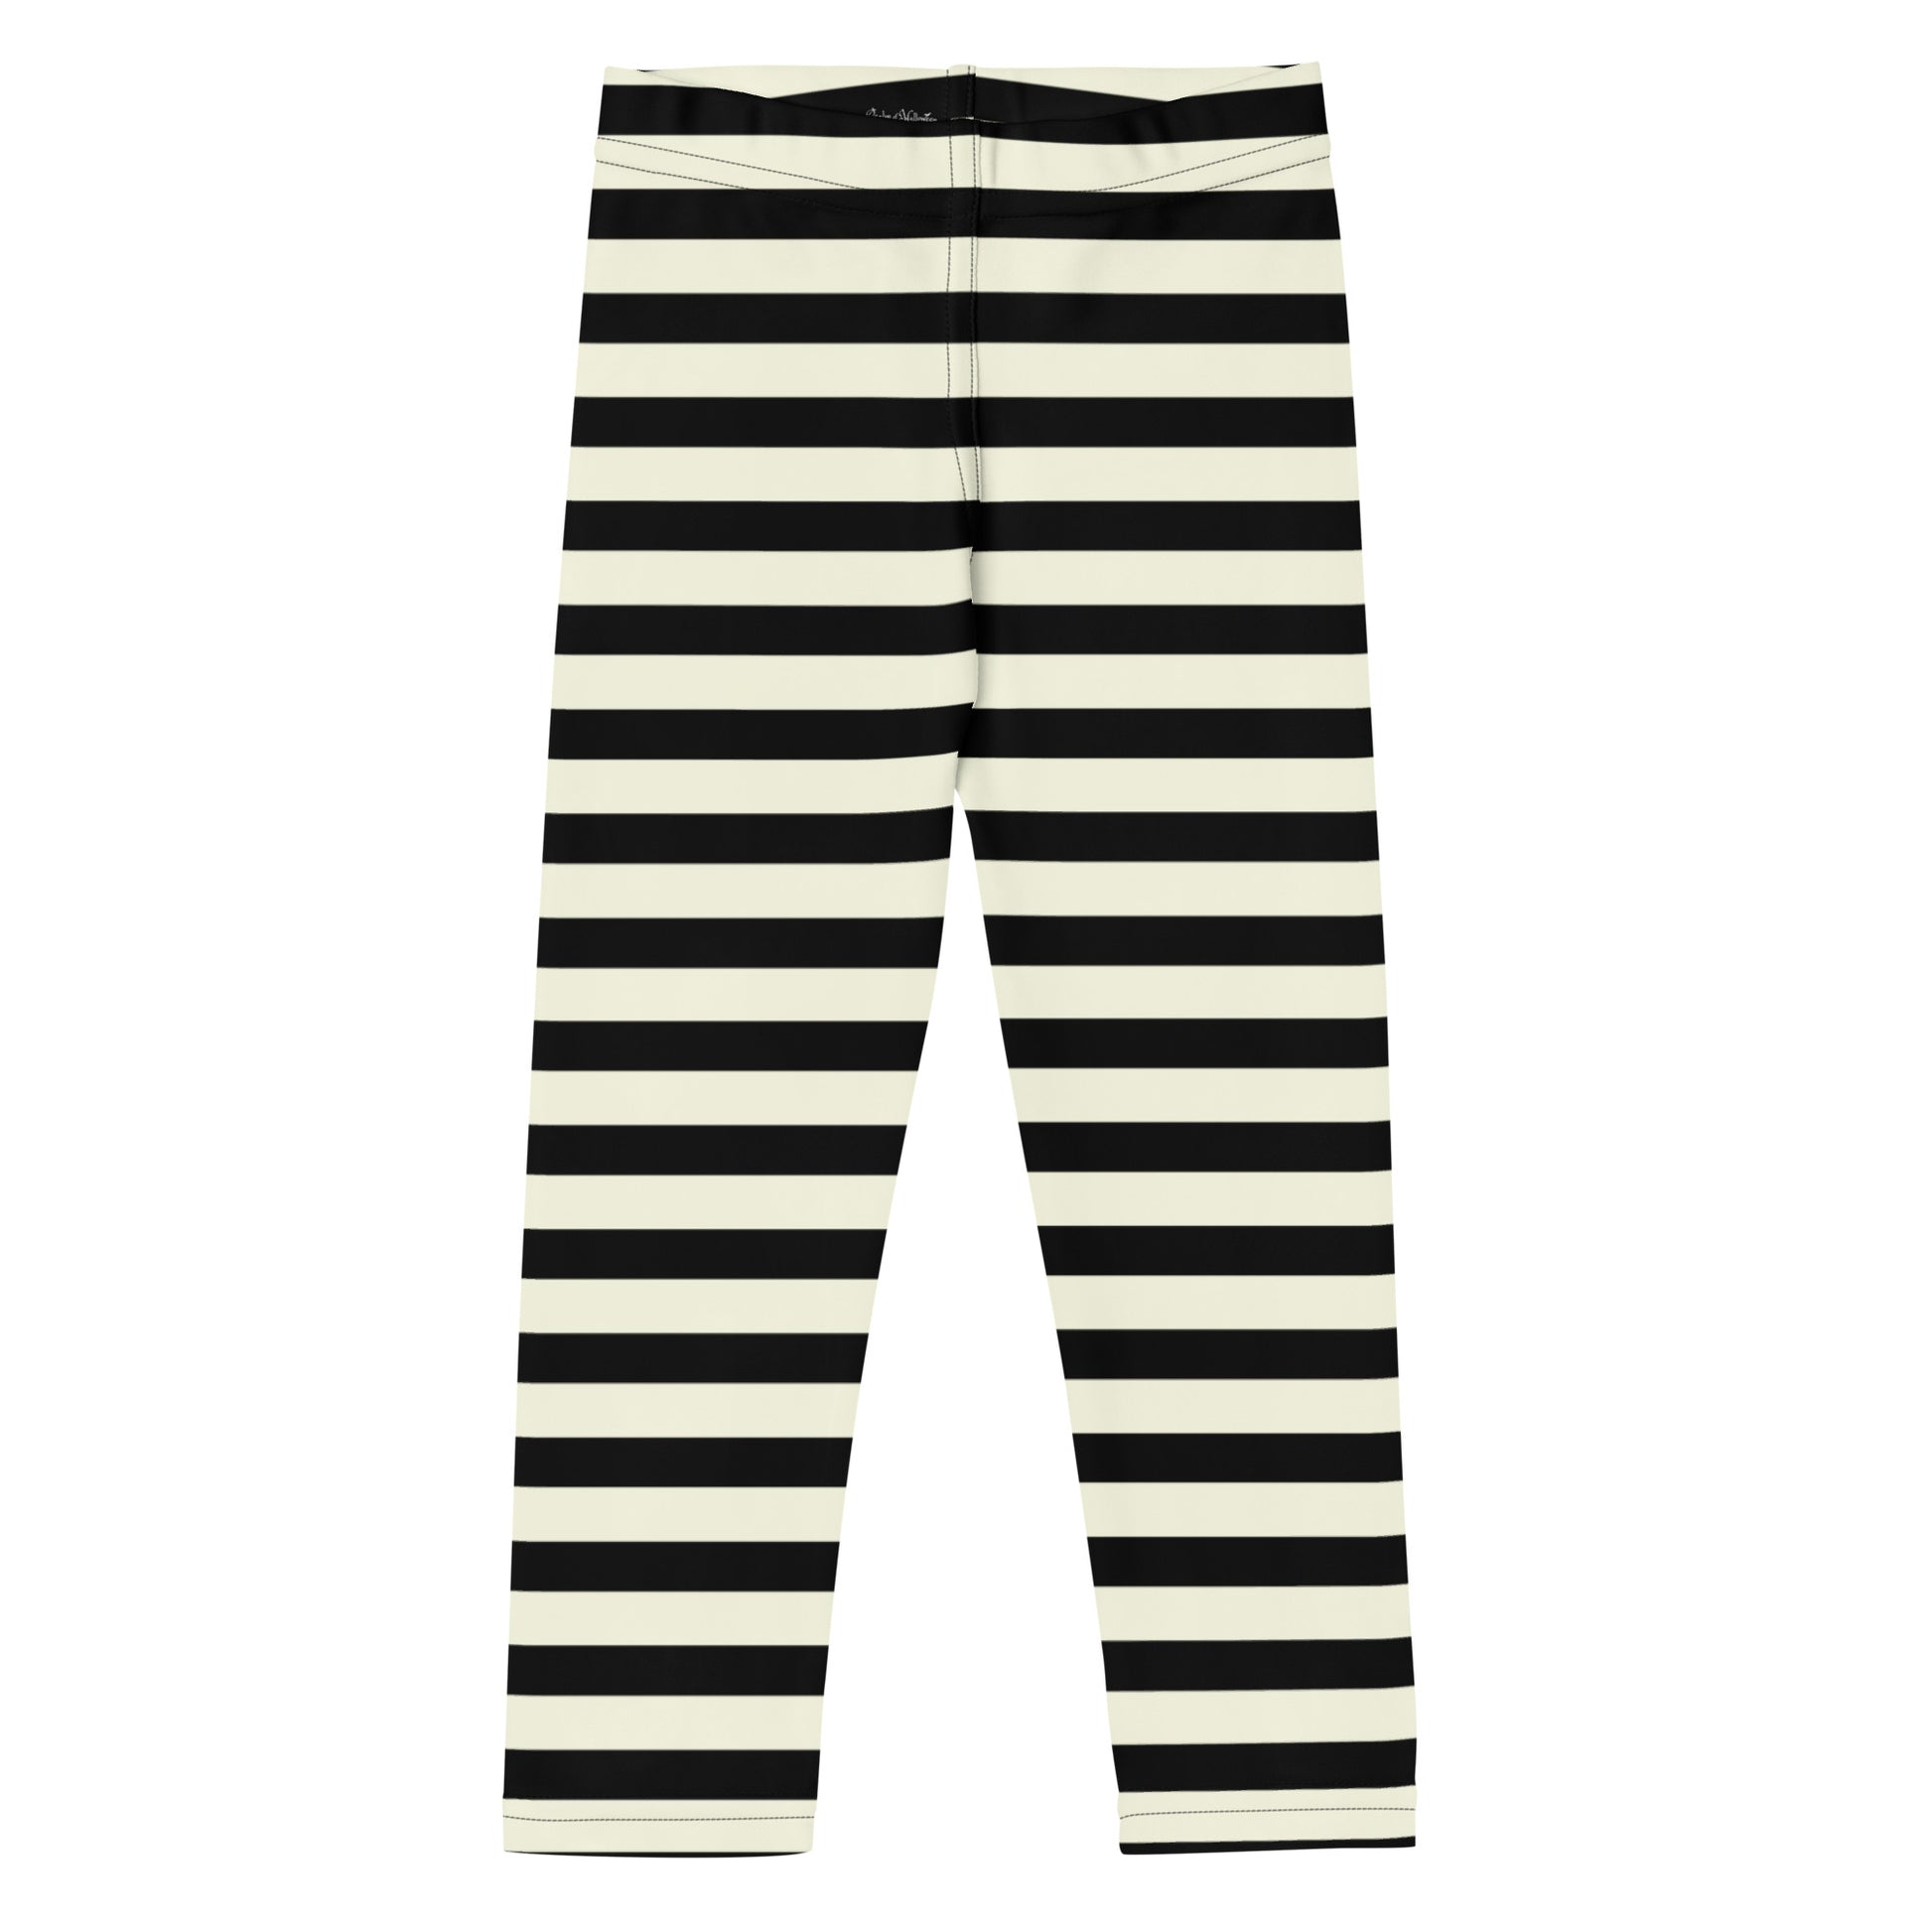 Black and Cream Horizontal Striped Children's Legging, from the Realm –  Realm of Halloween